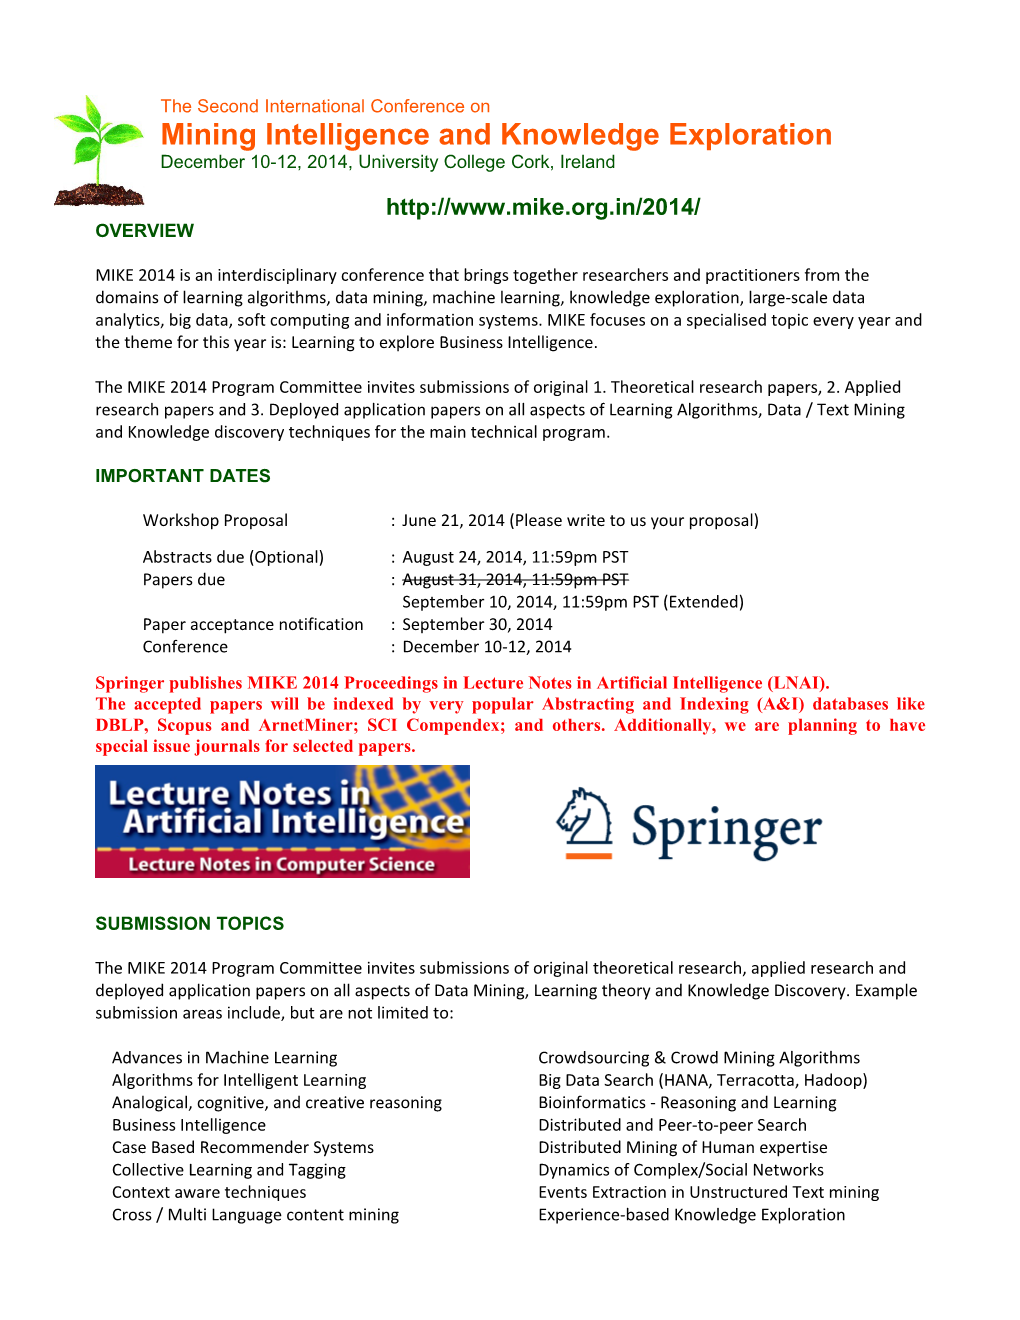 Springer Publishes MIKE 2014 Proceedings in Lecture Notes in Artificial Intelligence (LNAI)